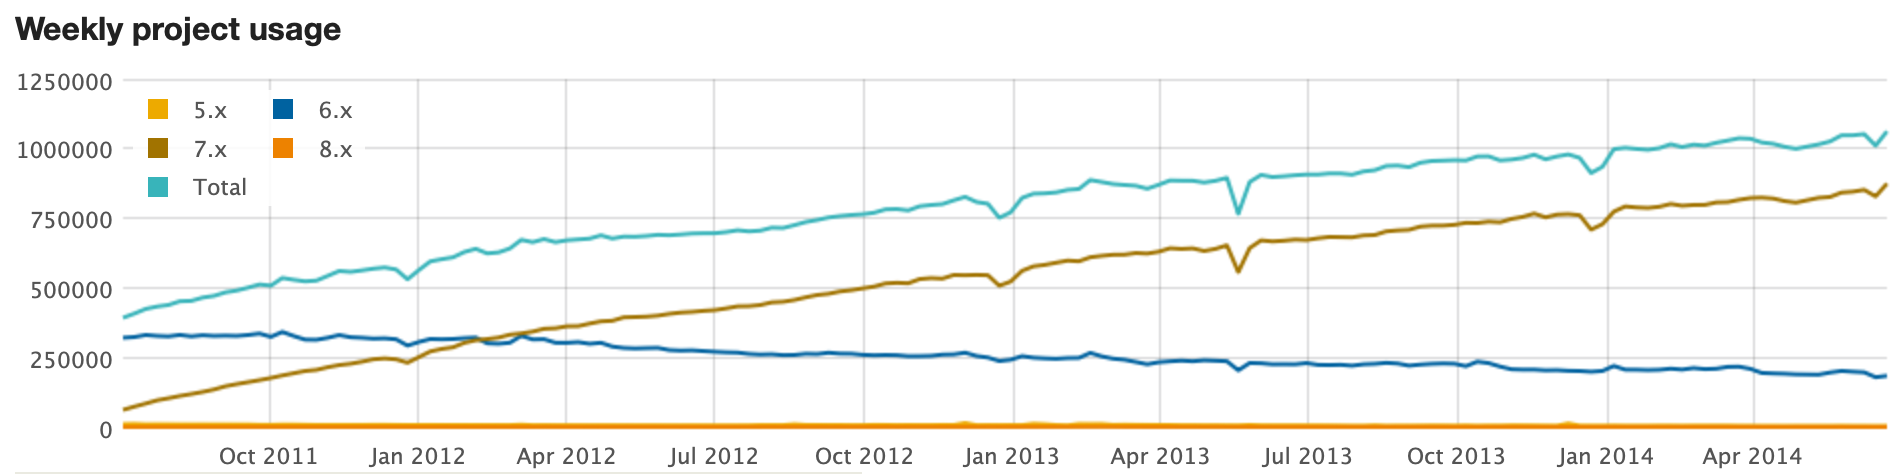 Usage Statistics for Drupal Core from 2010 to 2014